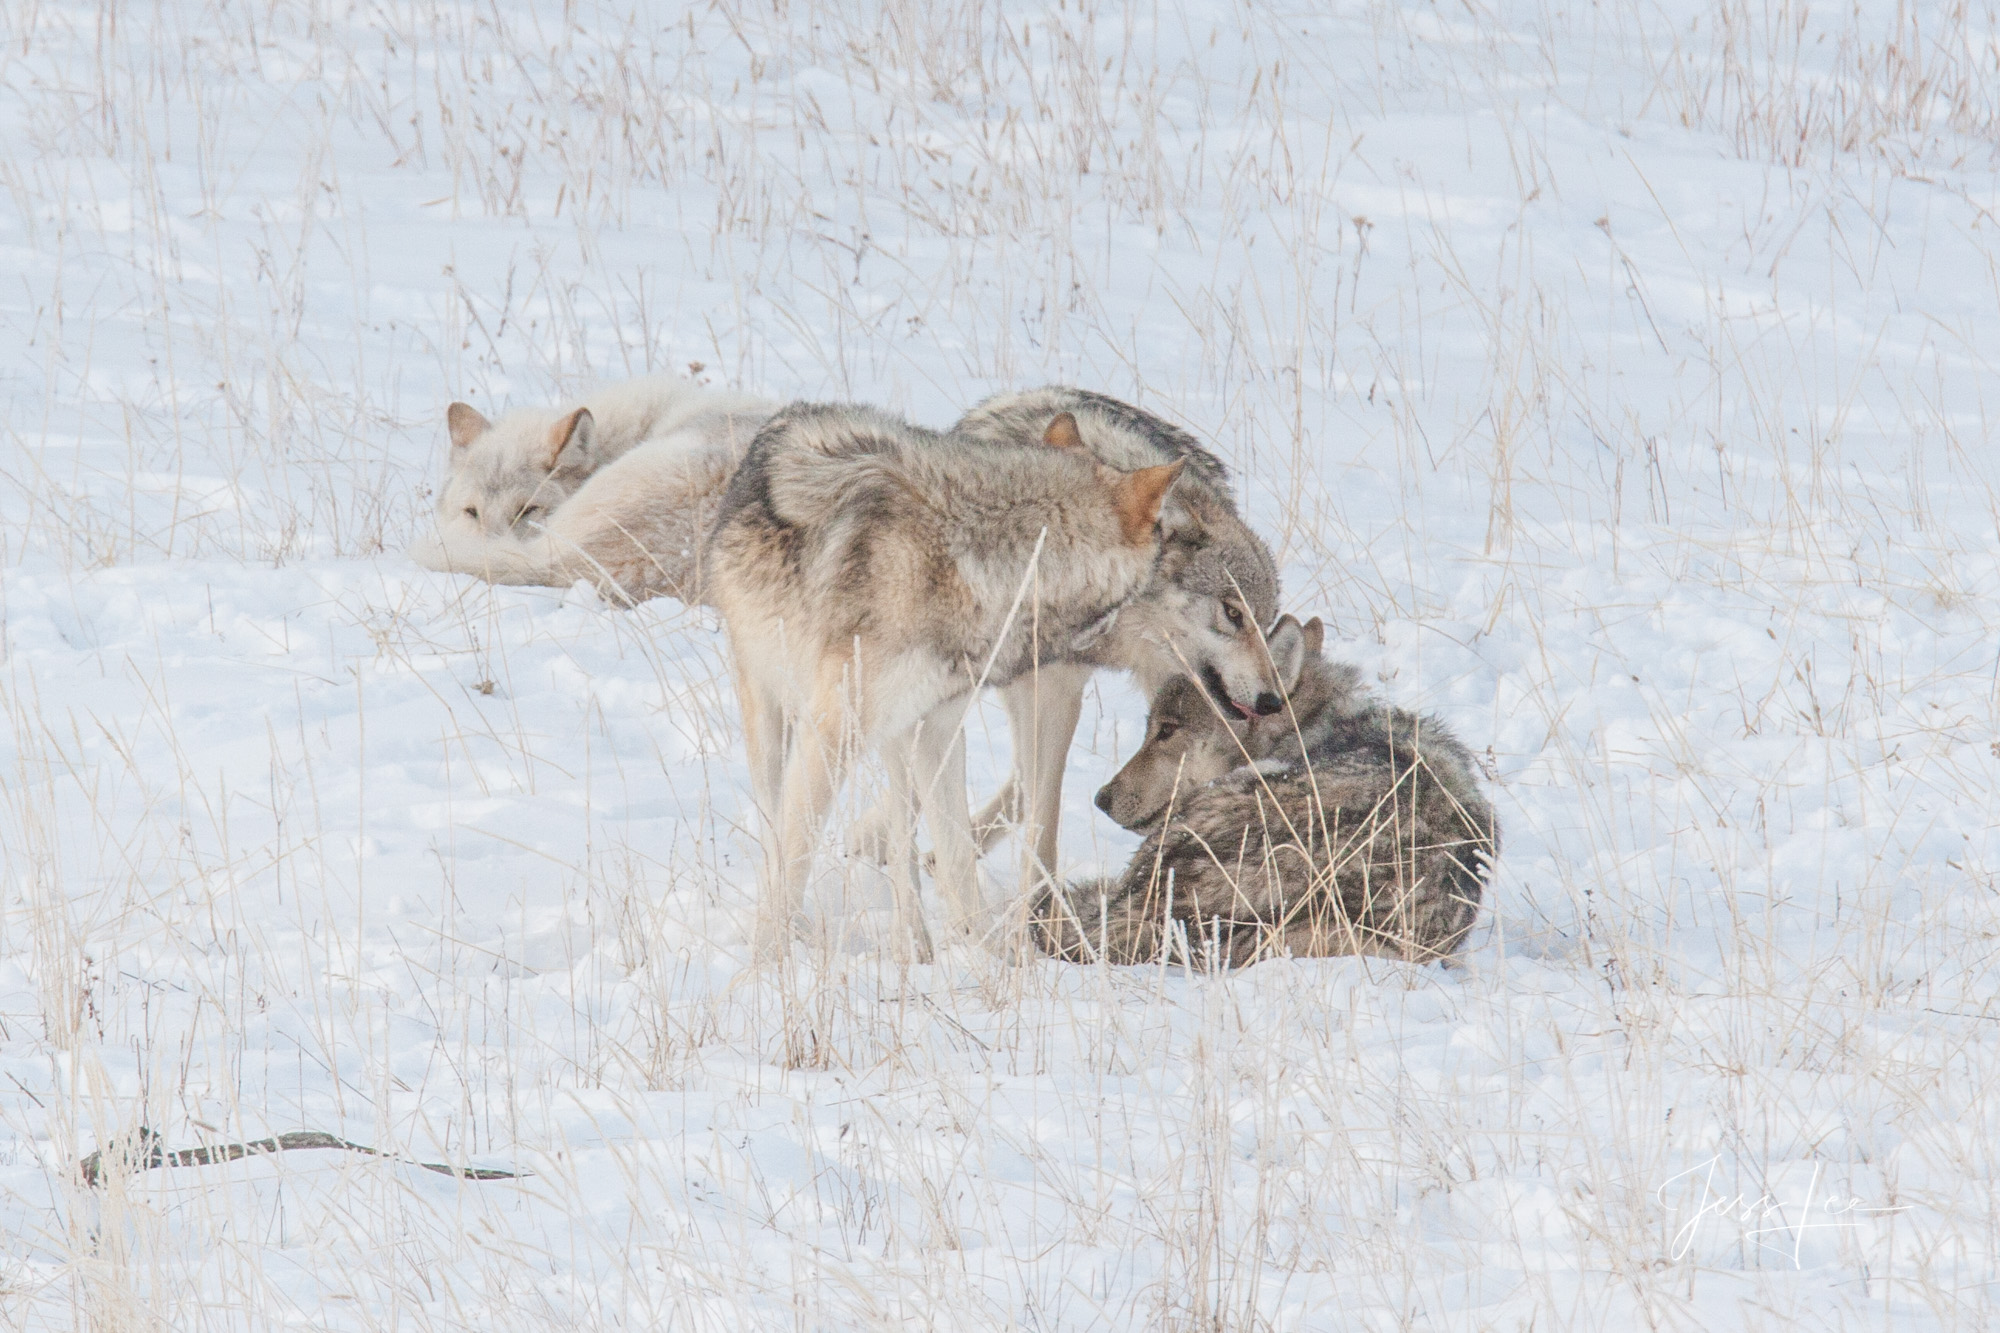 Sub adult wolves playing with parents